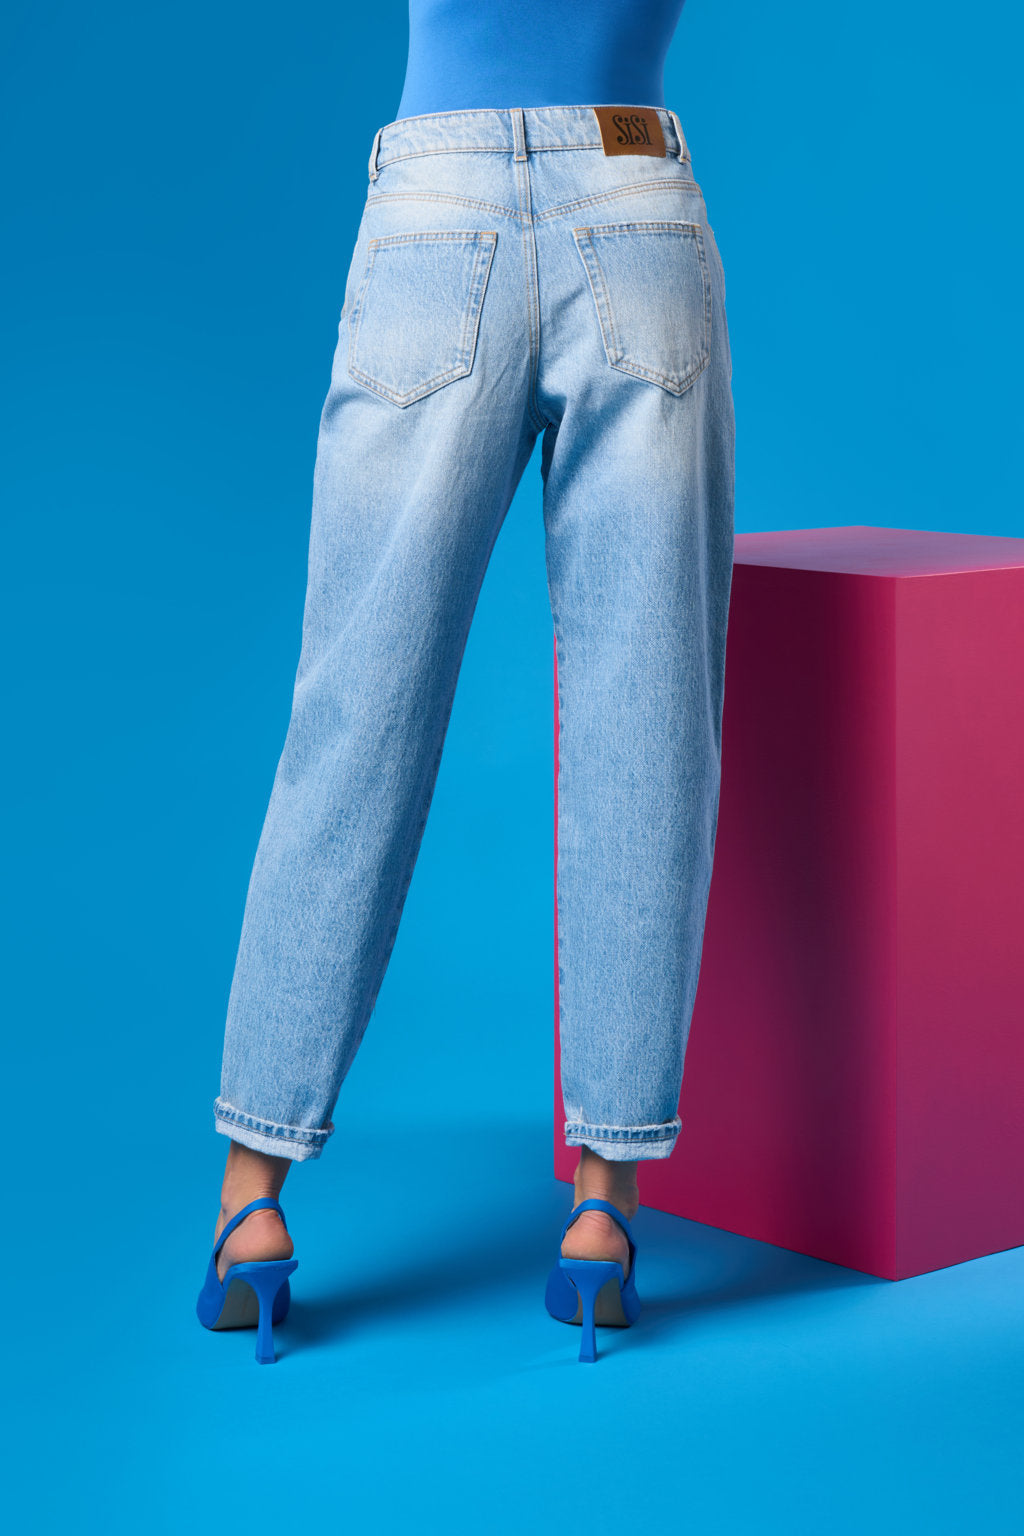 SiSi Boyfriend Jeans - High waisted mom style light denim jeans with fly zip and button closure, front and rear pockets and belt loops.